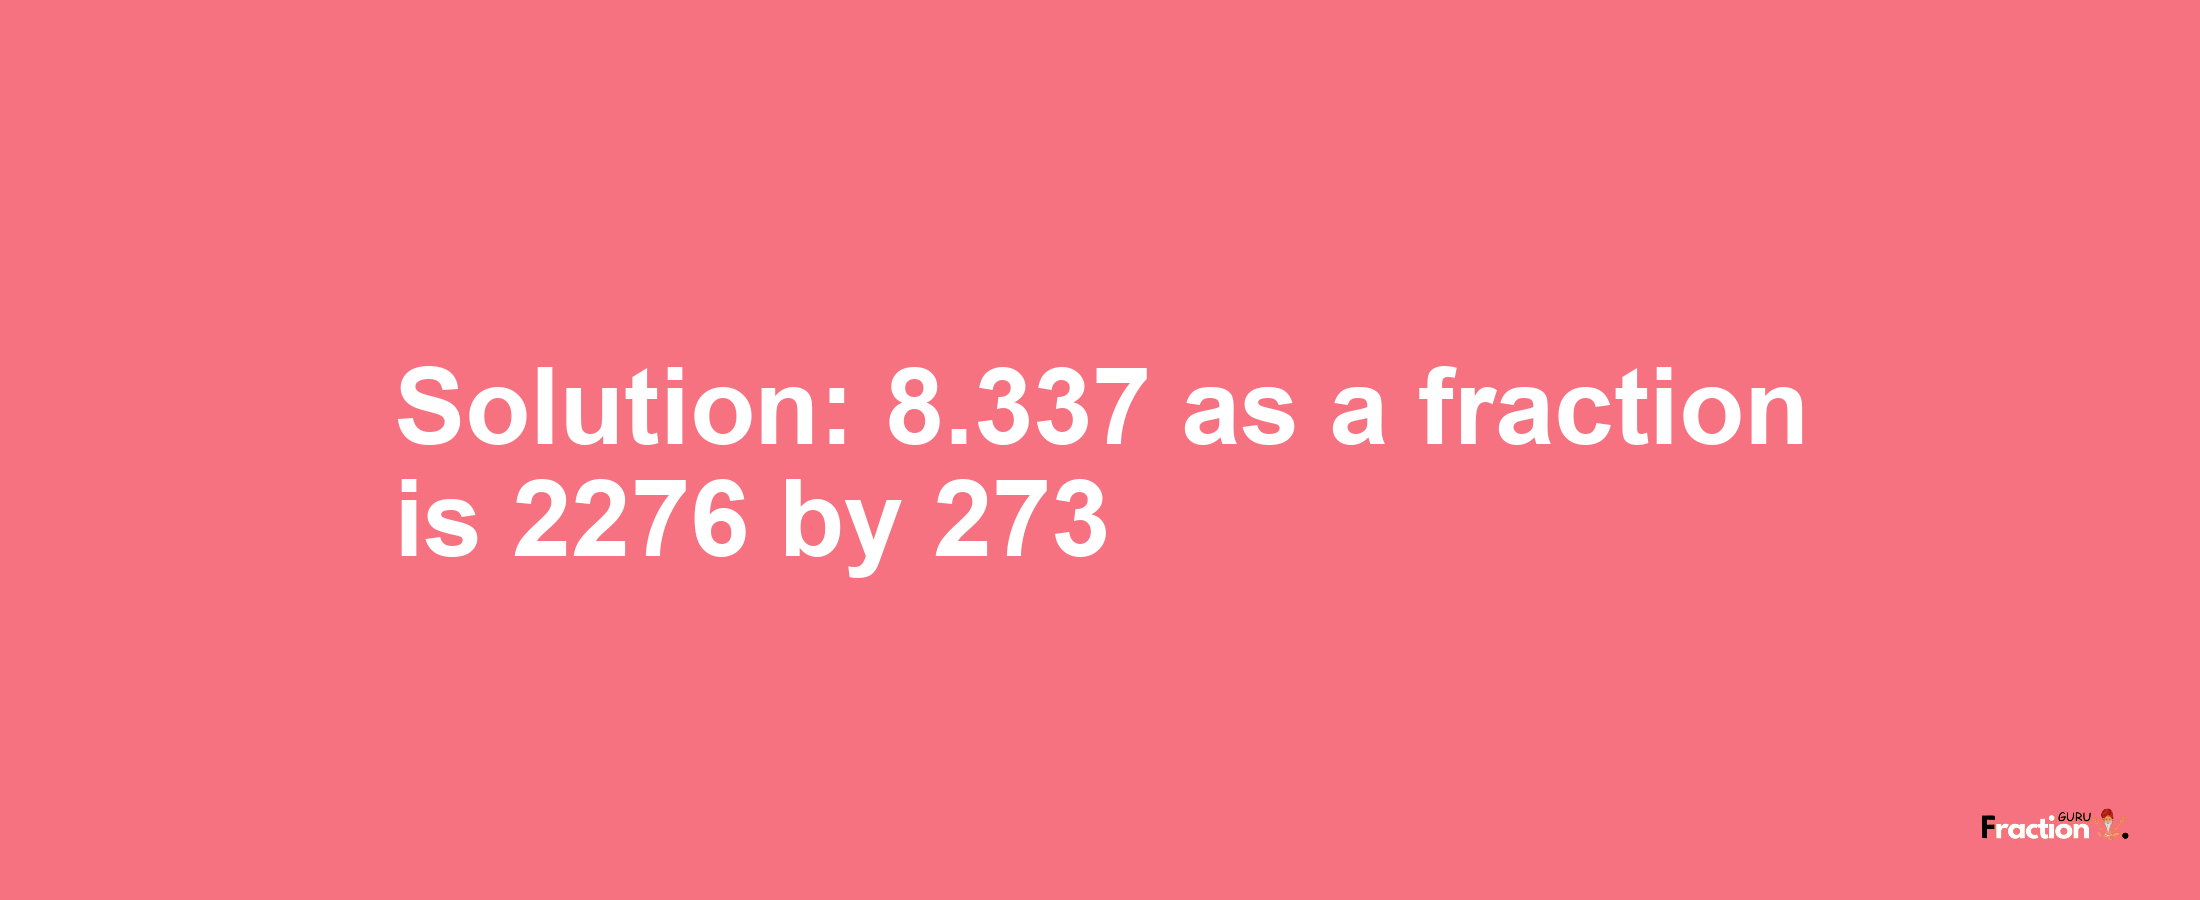 Solution:8.337 as a fraction is 2276/273